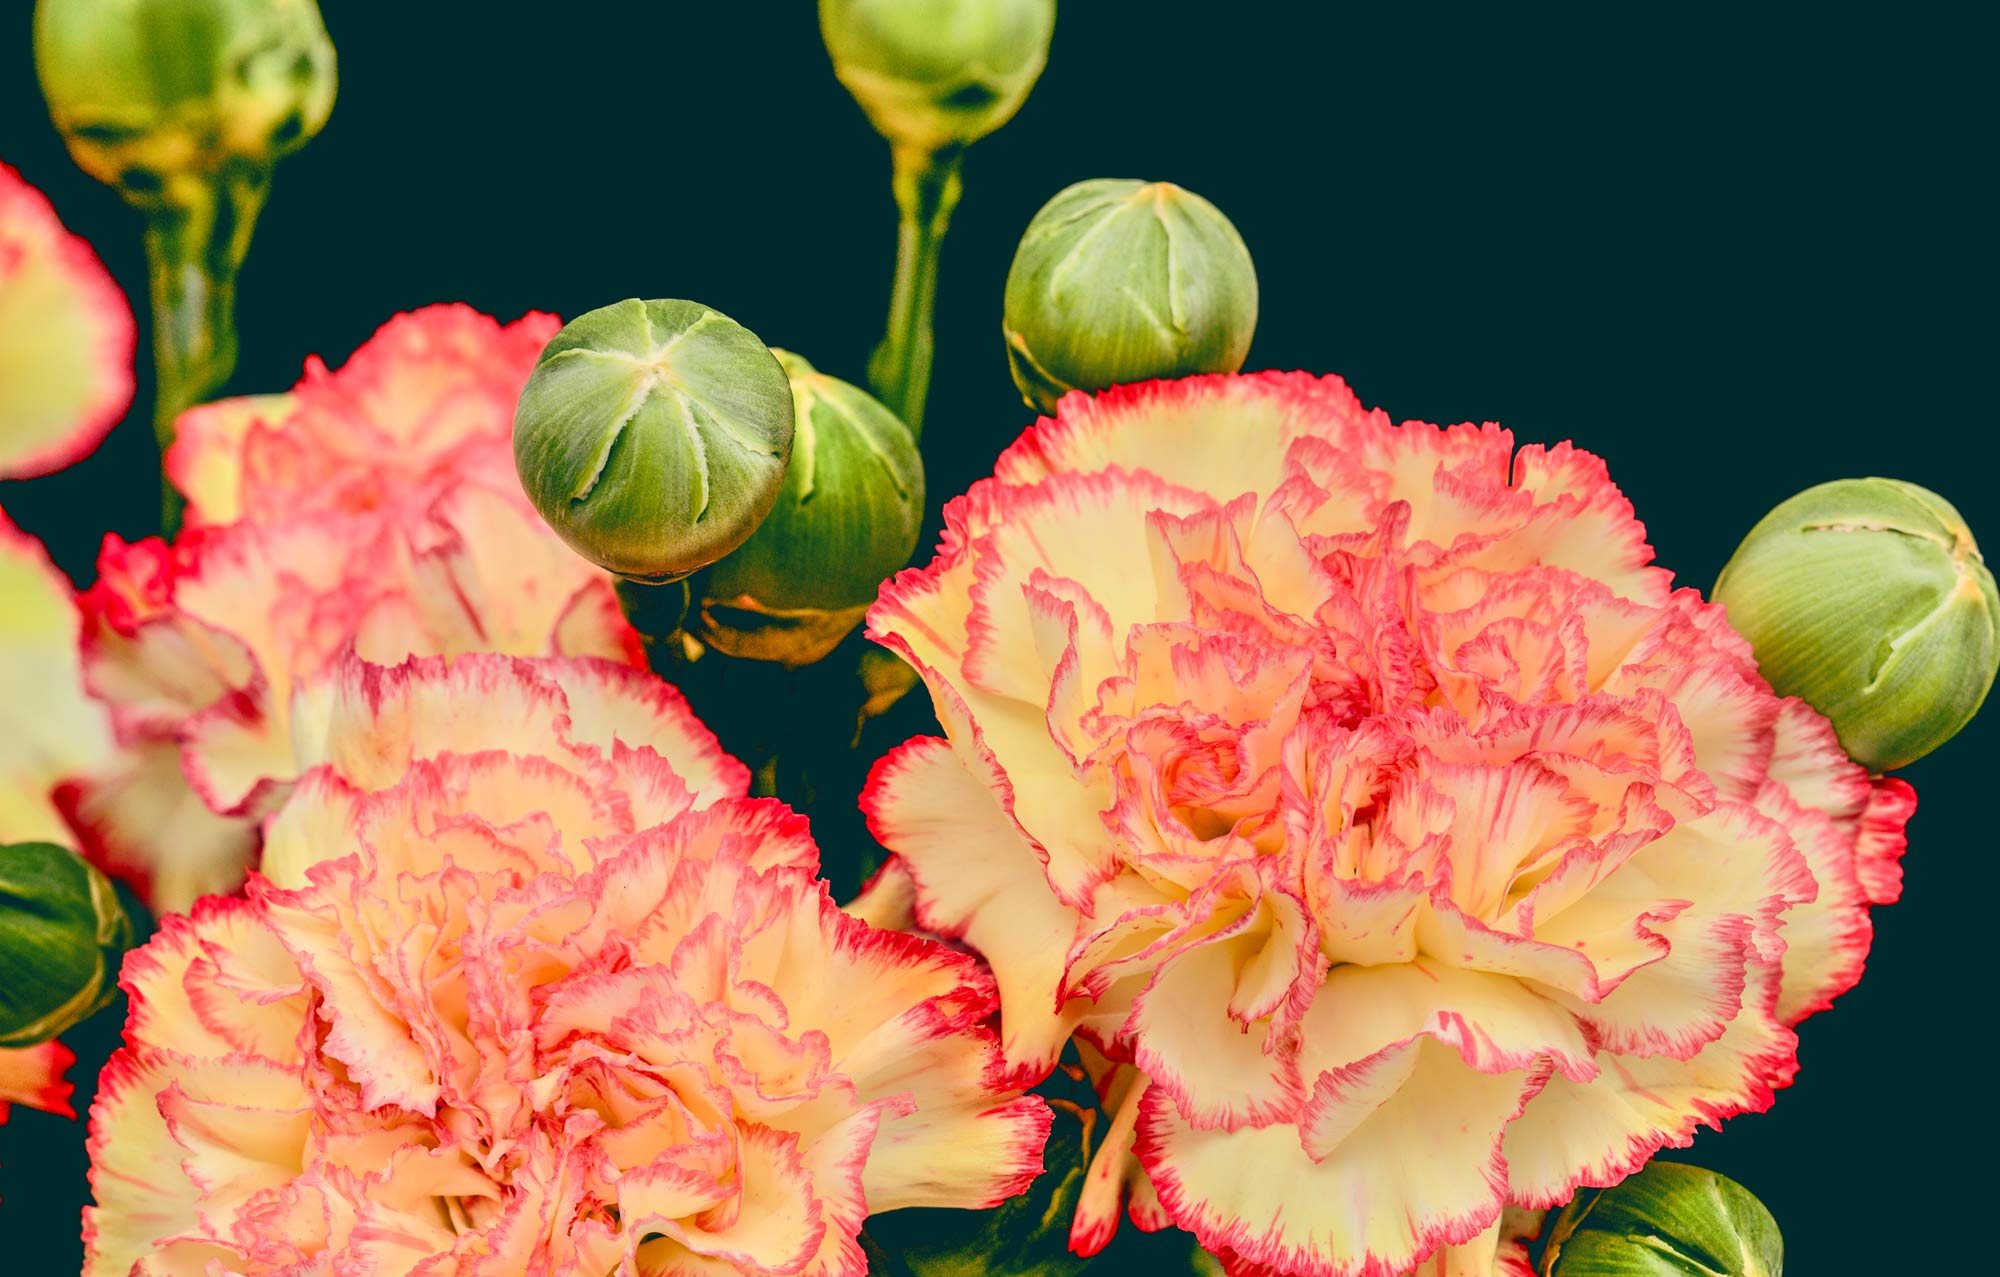 Flower of the Month January: Carnation & Snowdrop